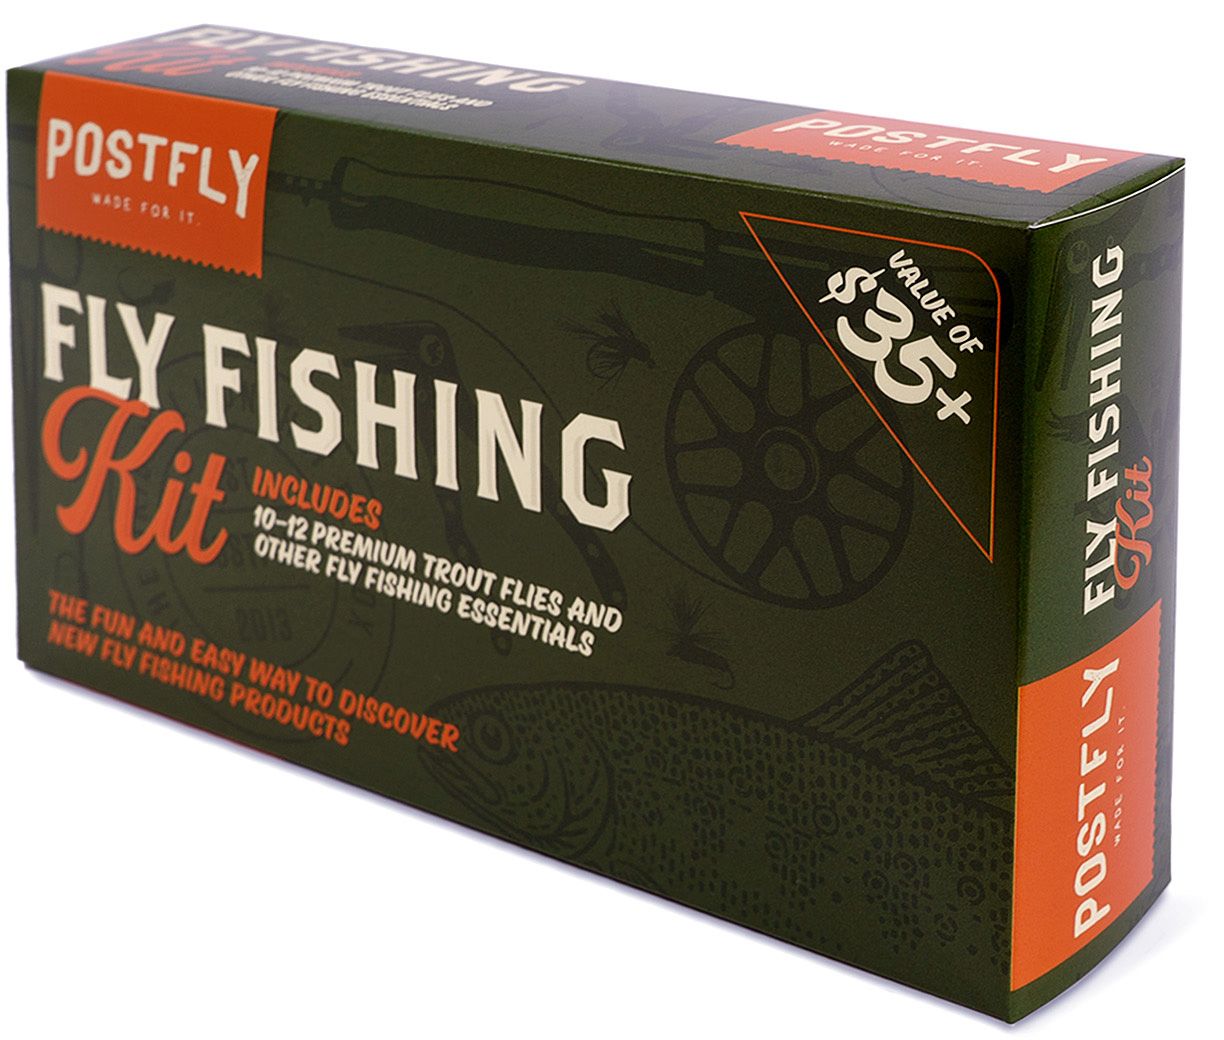 Shop Fly Fishing Gear - Best Price at DICK'S